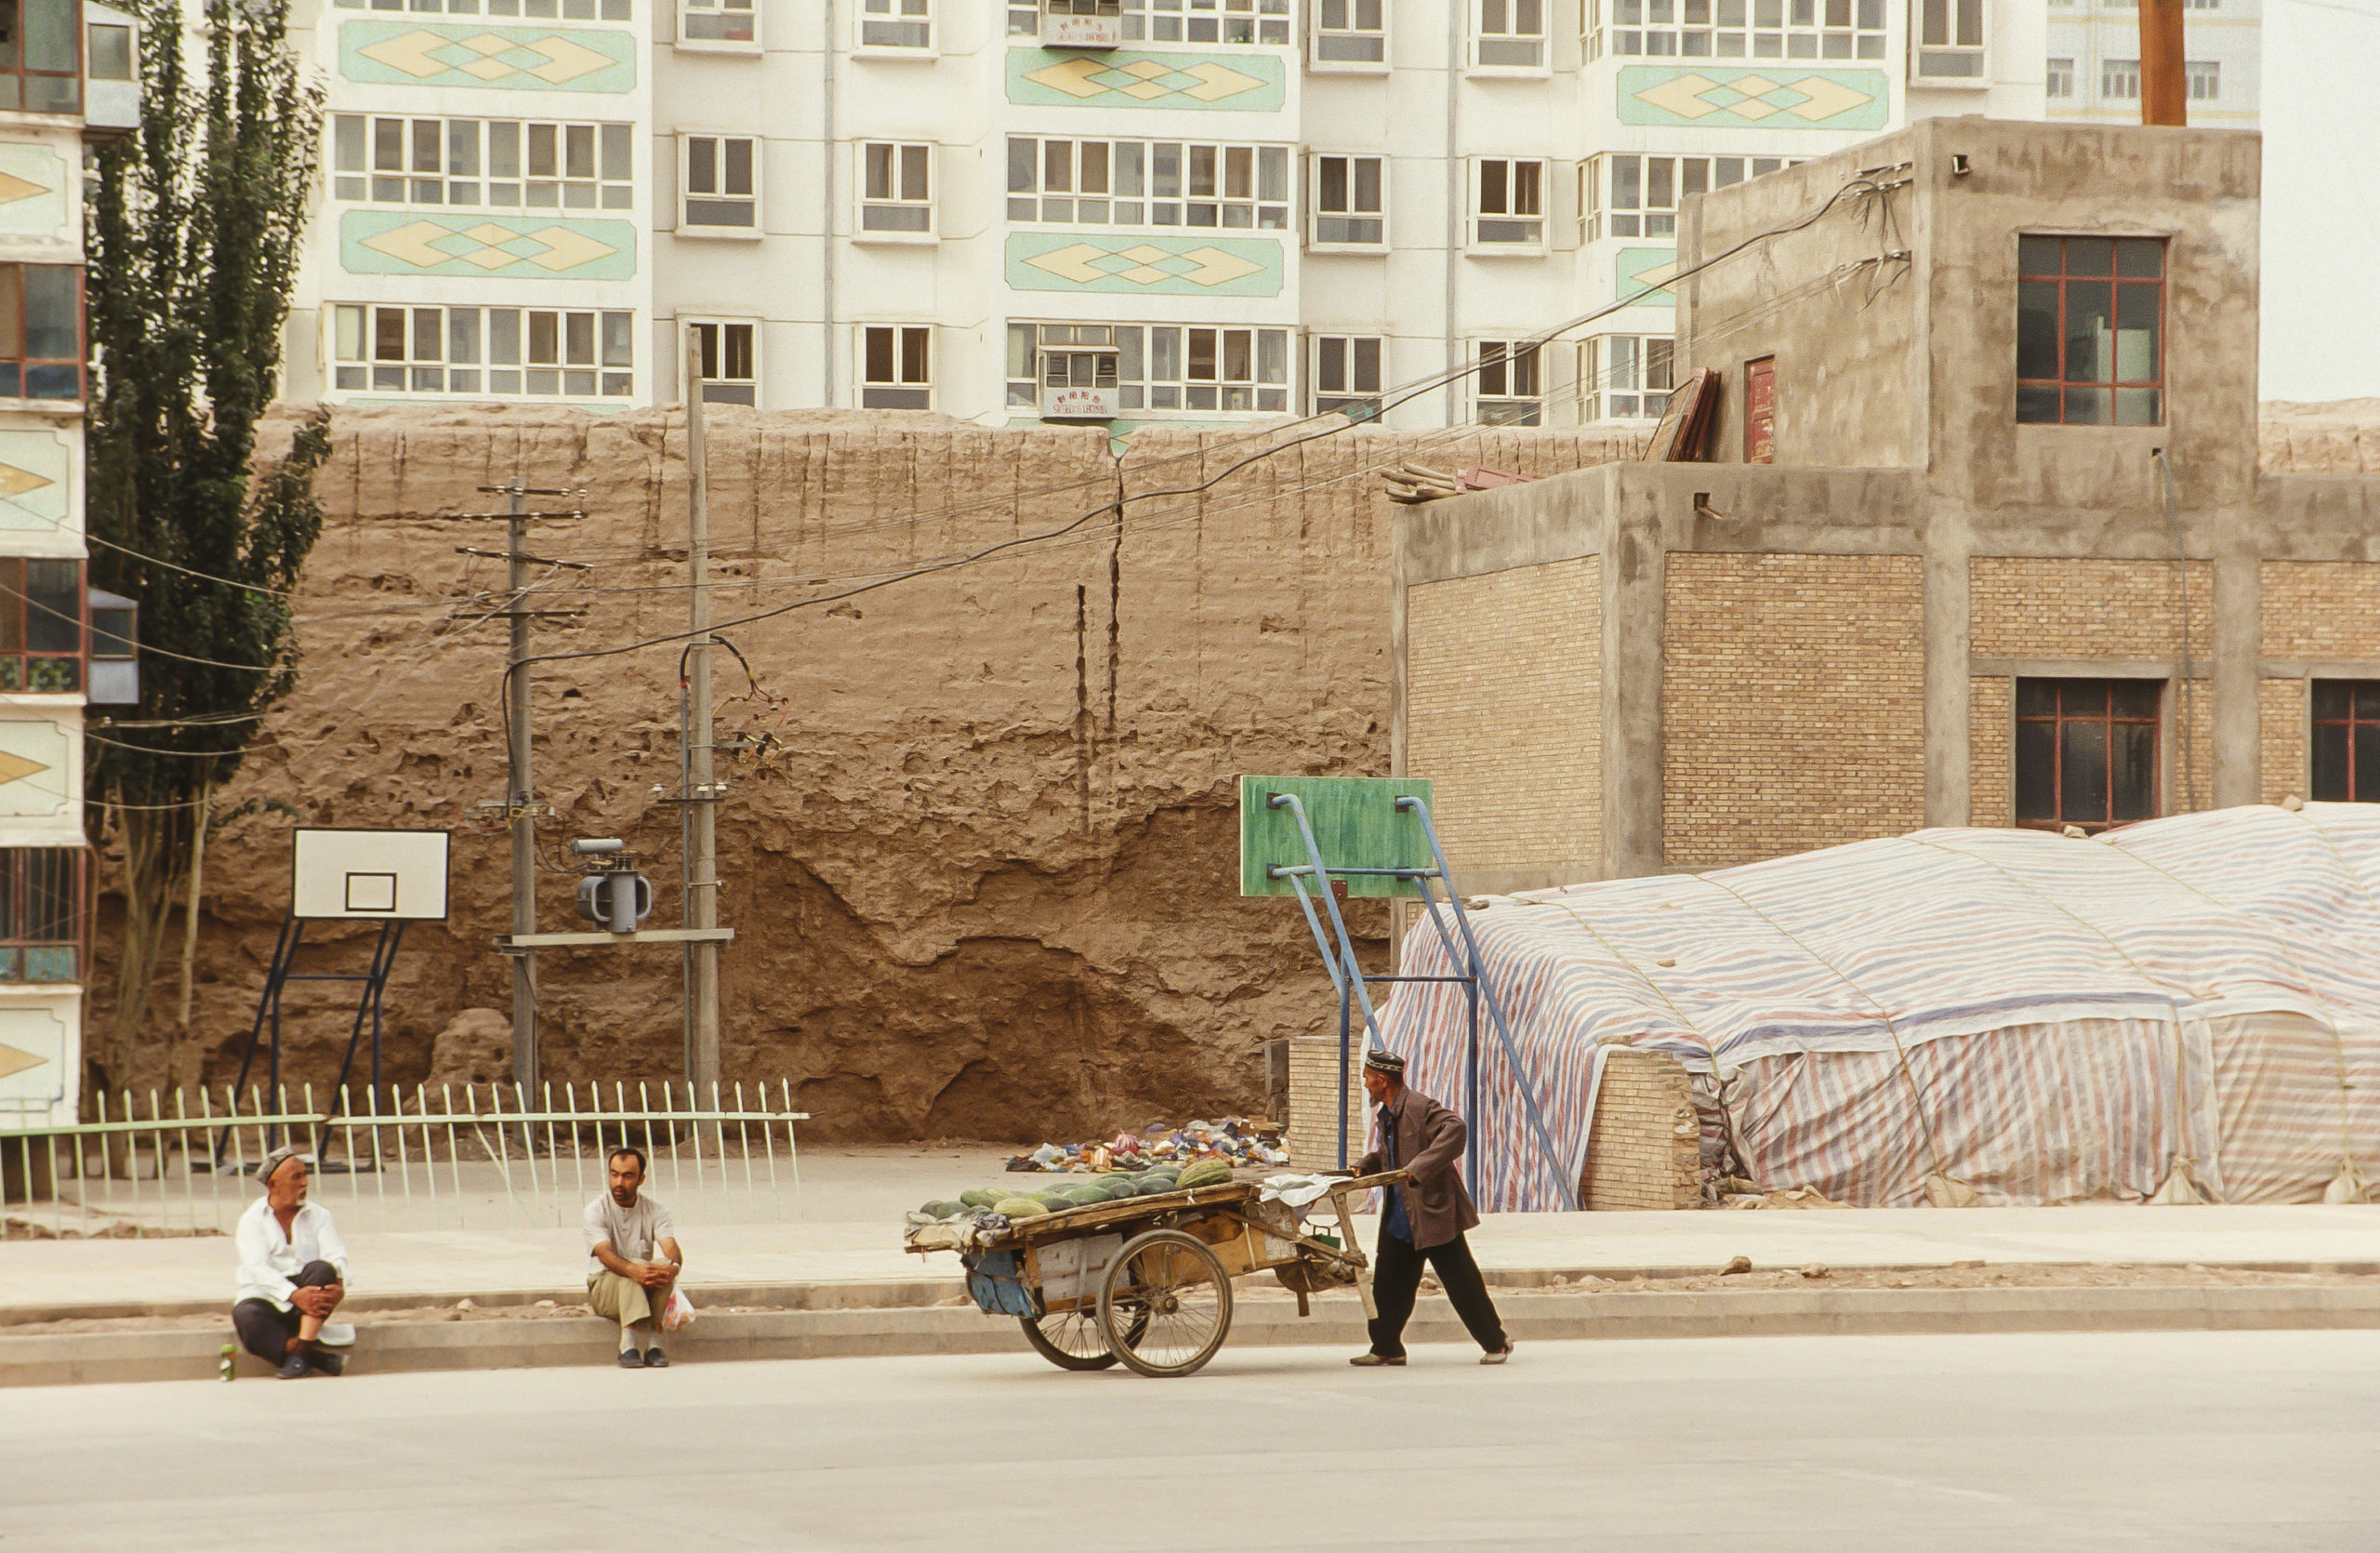 Kashgar image project, extended selection-59